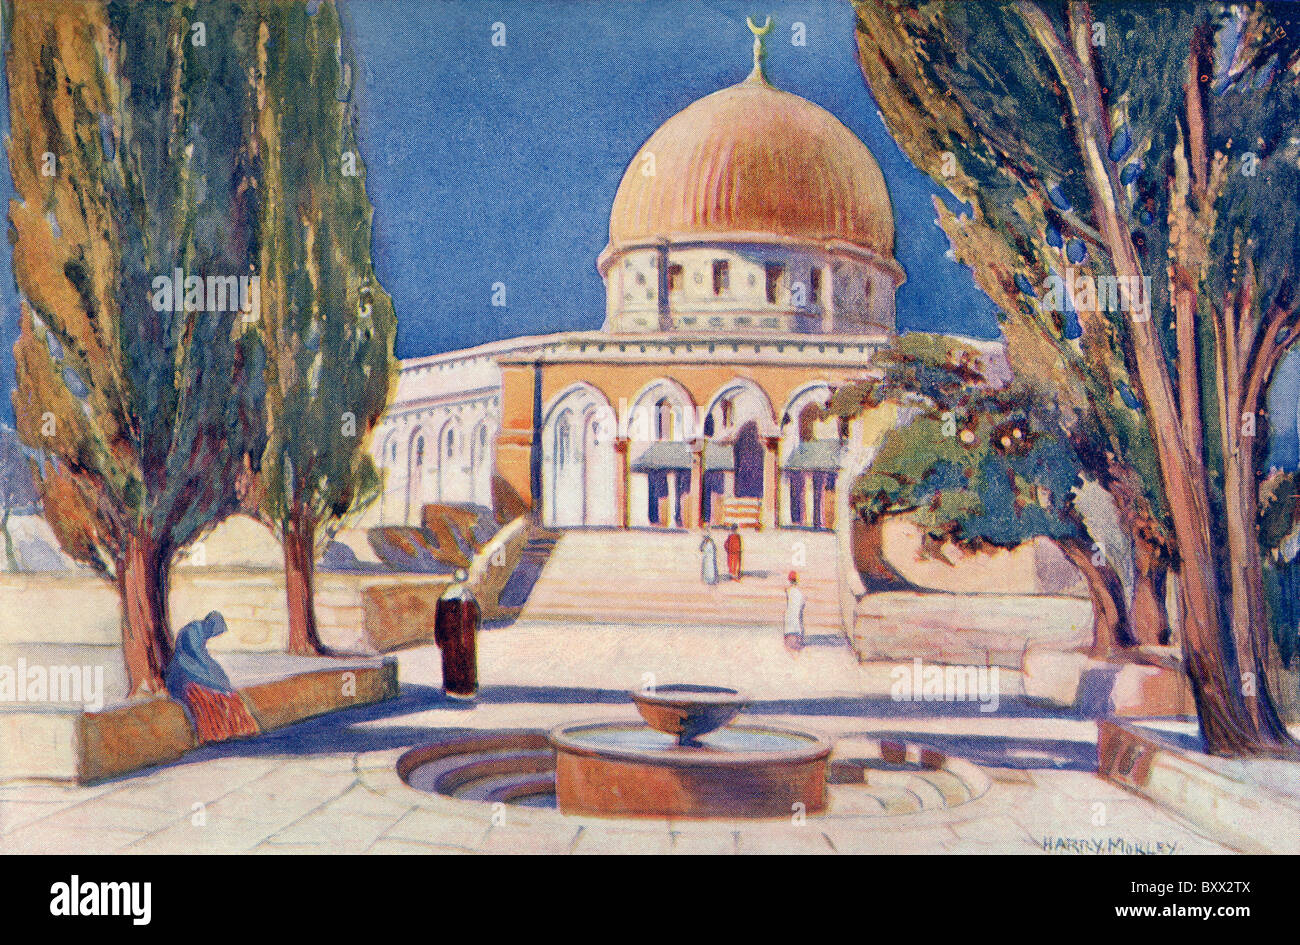 The Dome of the Rock on Temple Mount, Jerusalem, Palestine, circa 1910. Stock Photo